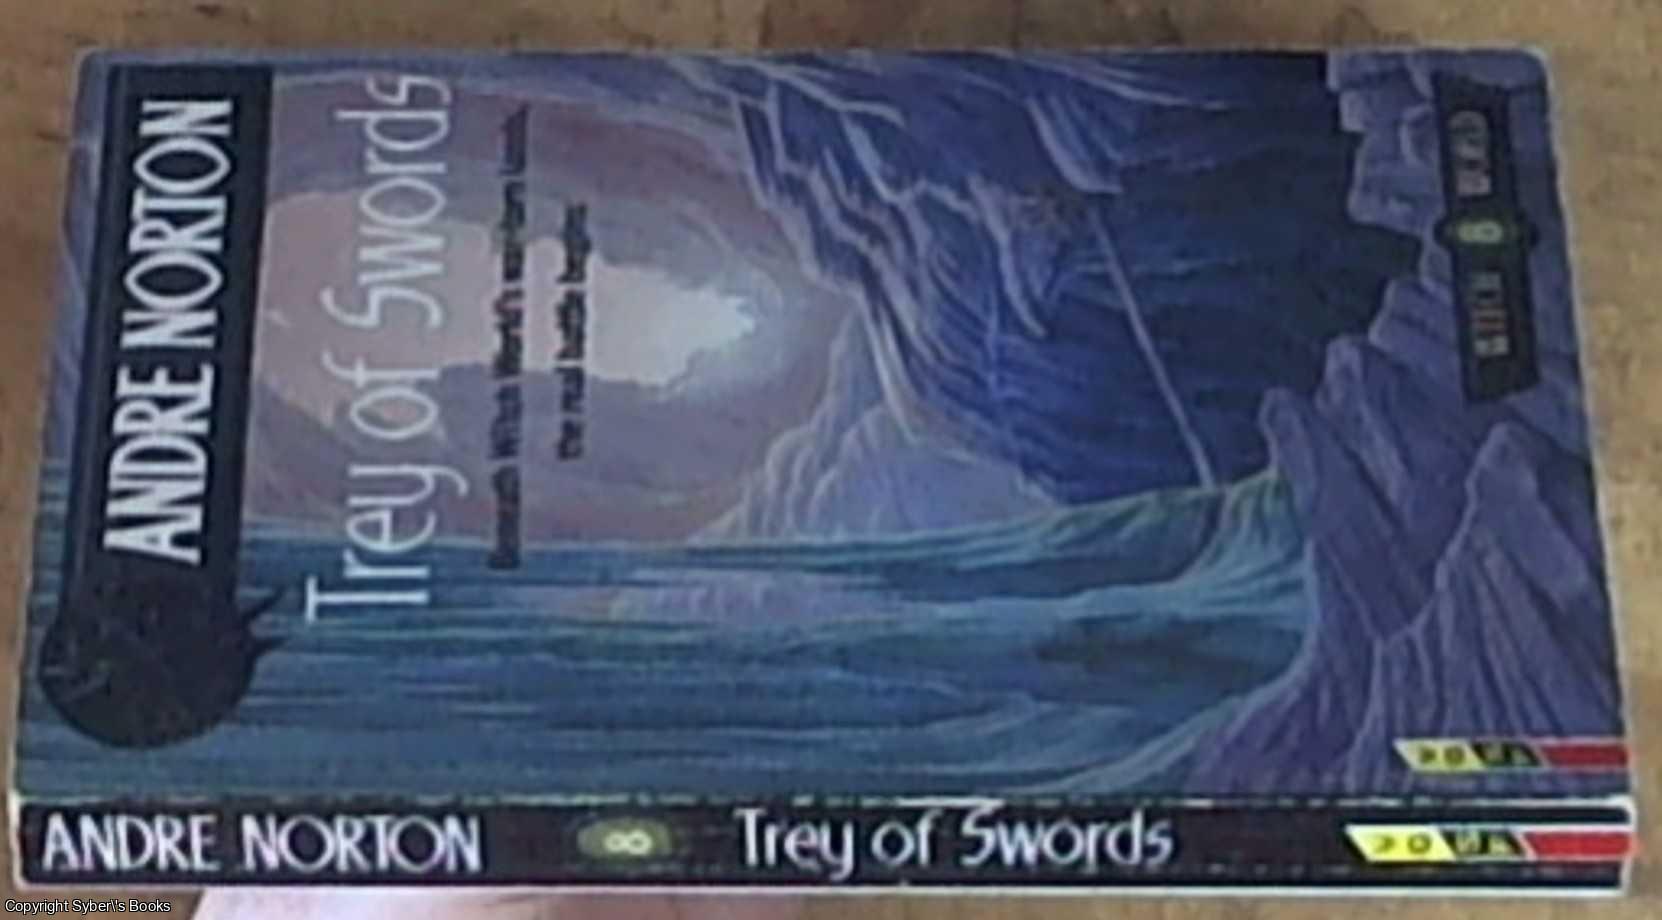 Norton, Andre - Trey of Swords (Witch world 8)